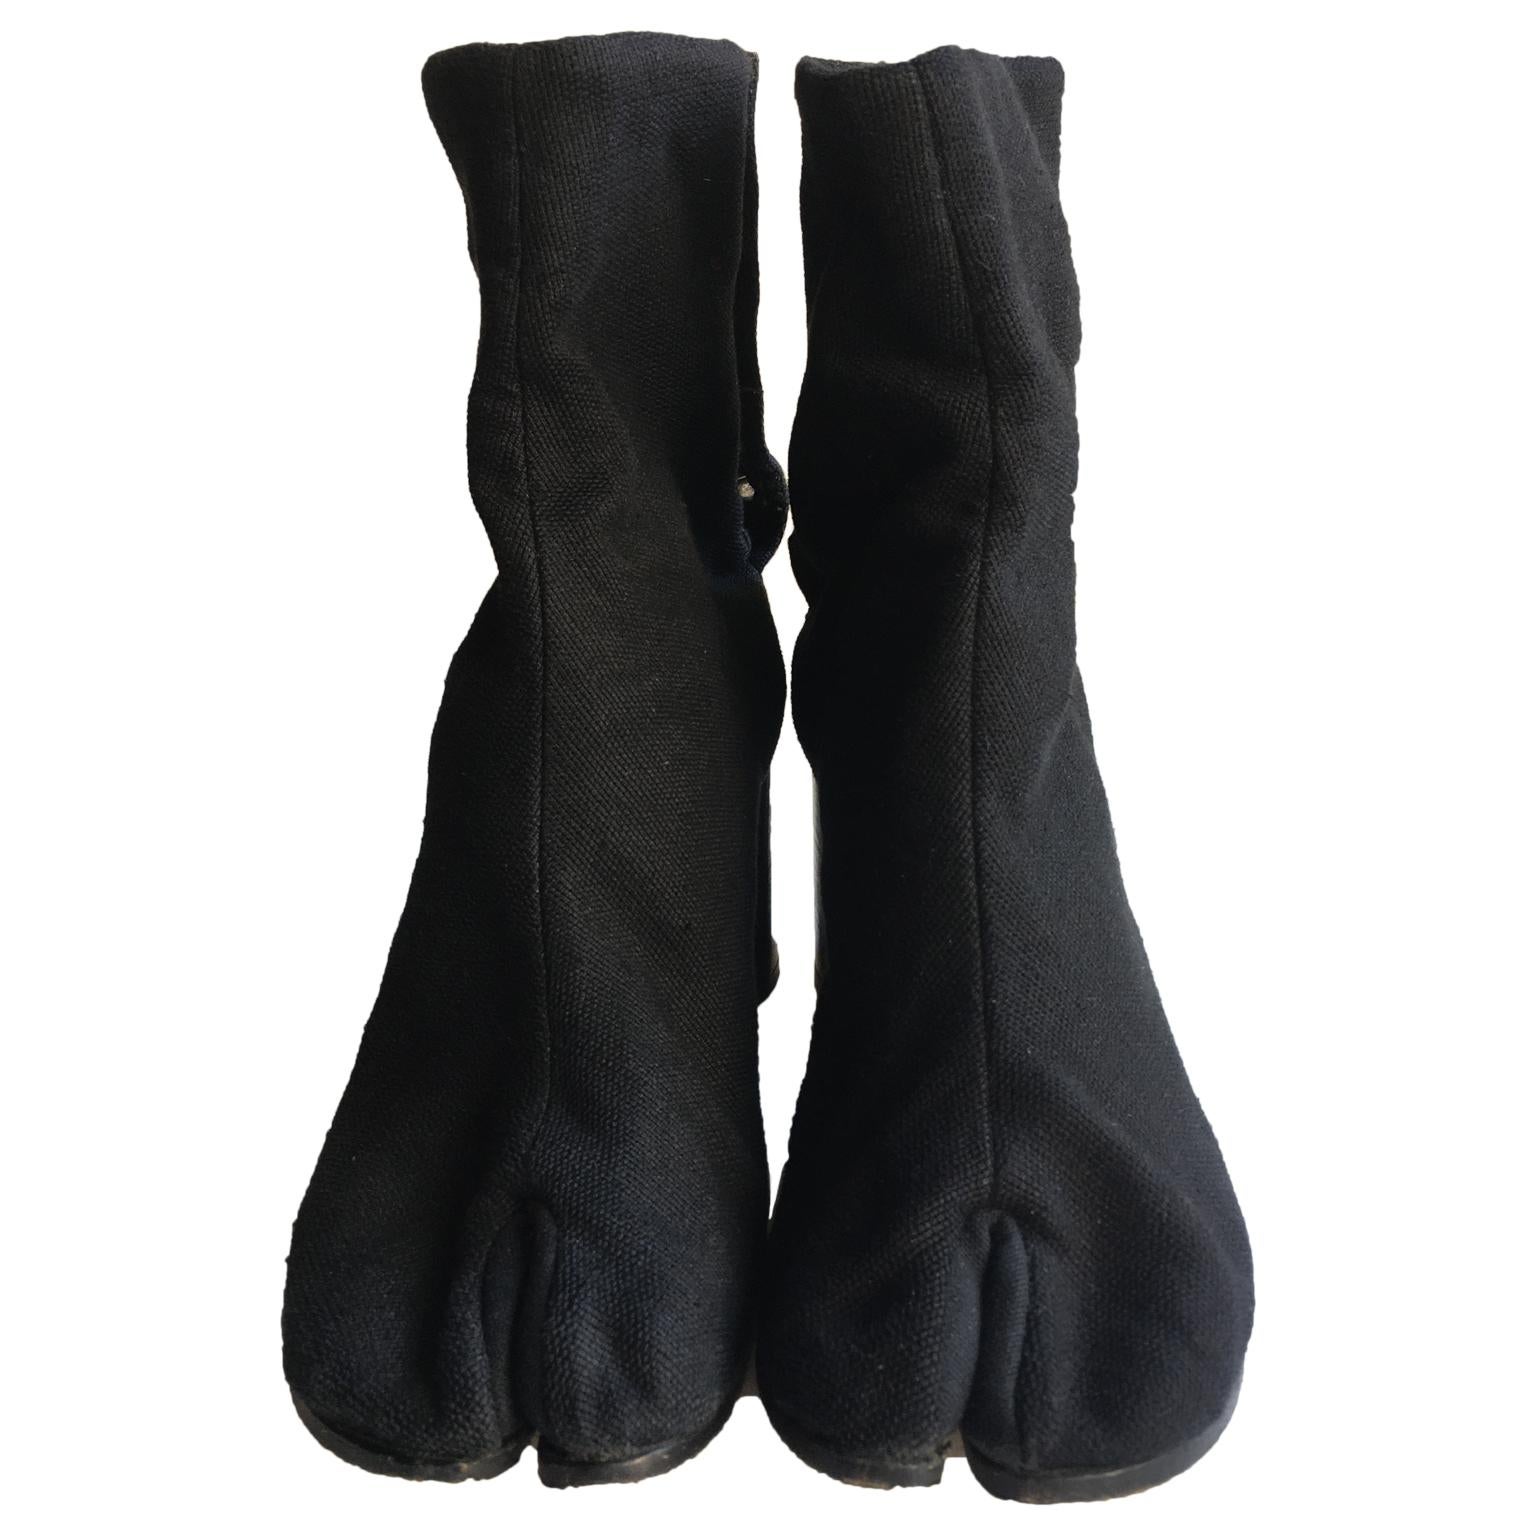 Rare Archival Maison Martin Margiela black raw canvas Tabi boots from circa 1999.
Worn but in good condition.
Size : 38